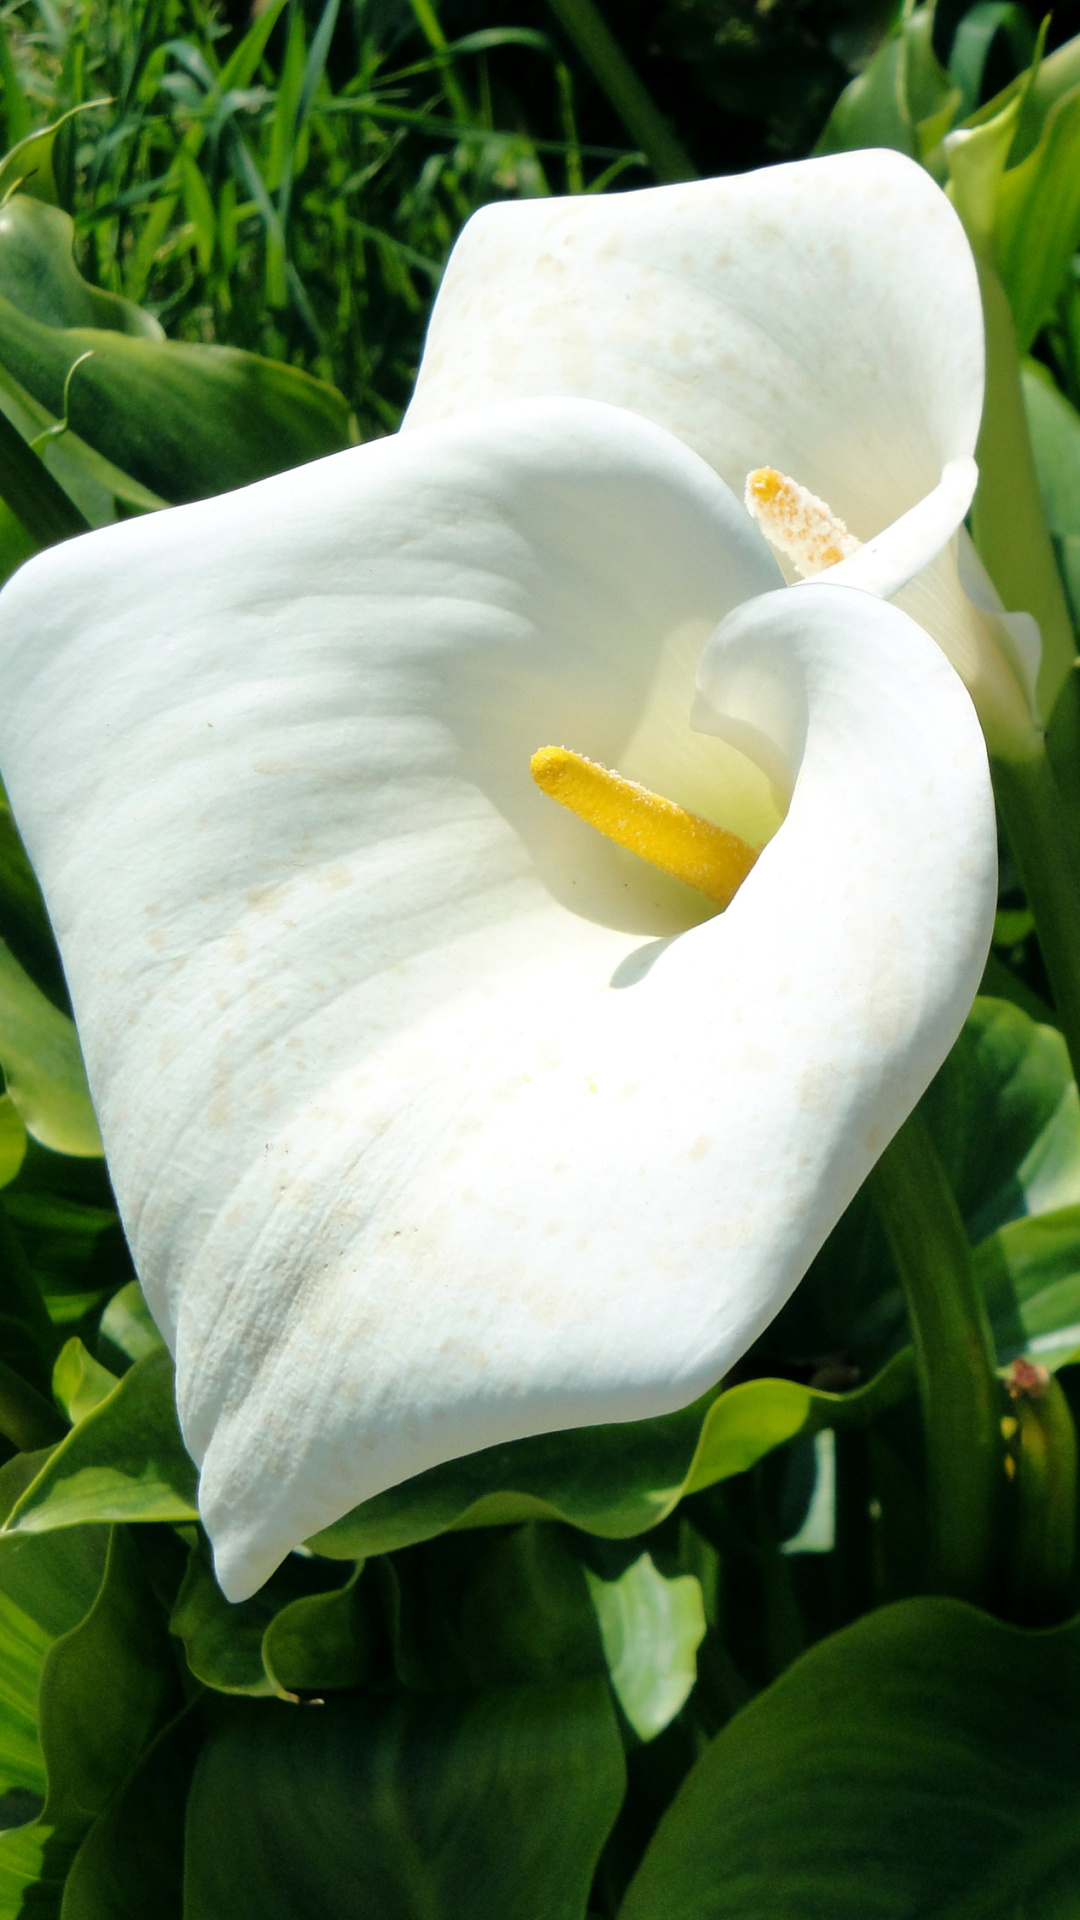 Calla Lily: The plant featured in many of Diego Rivera's works of art. 1080x1920 Full HD Wallpaper.